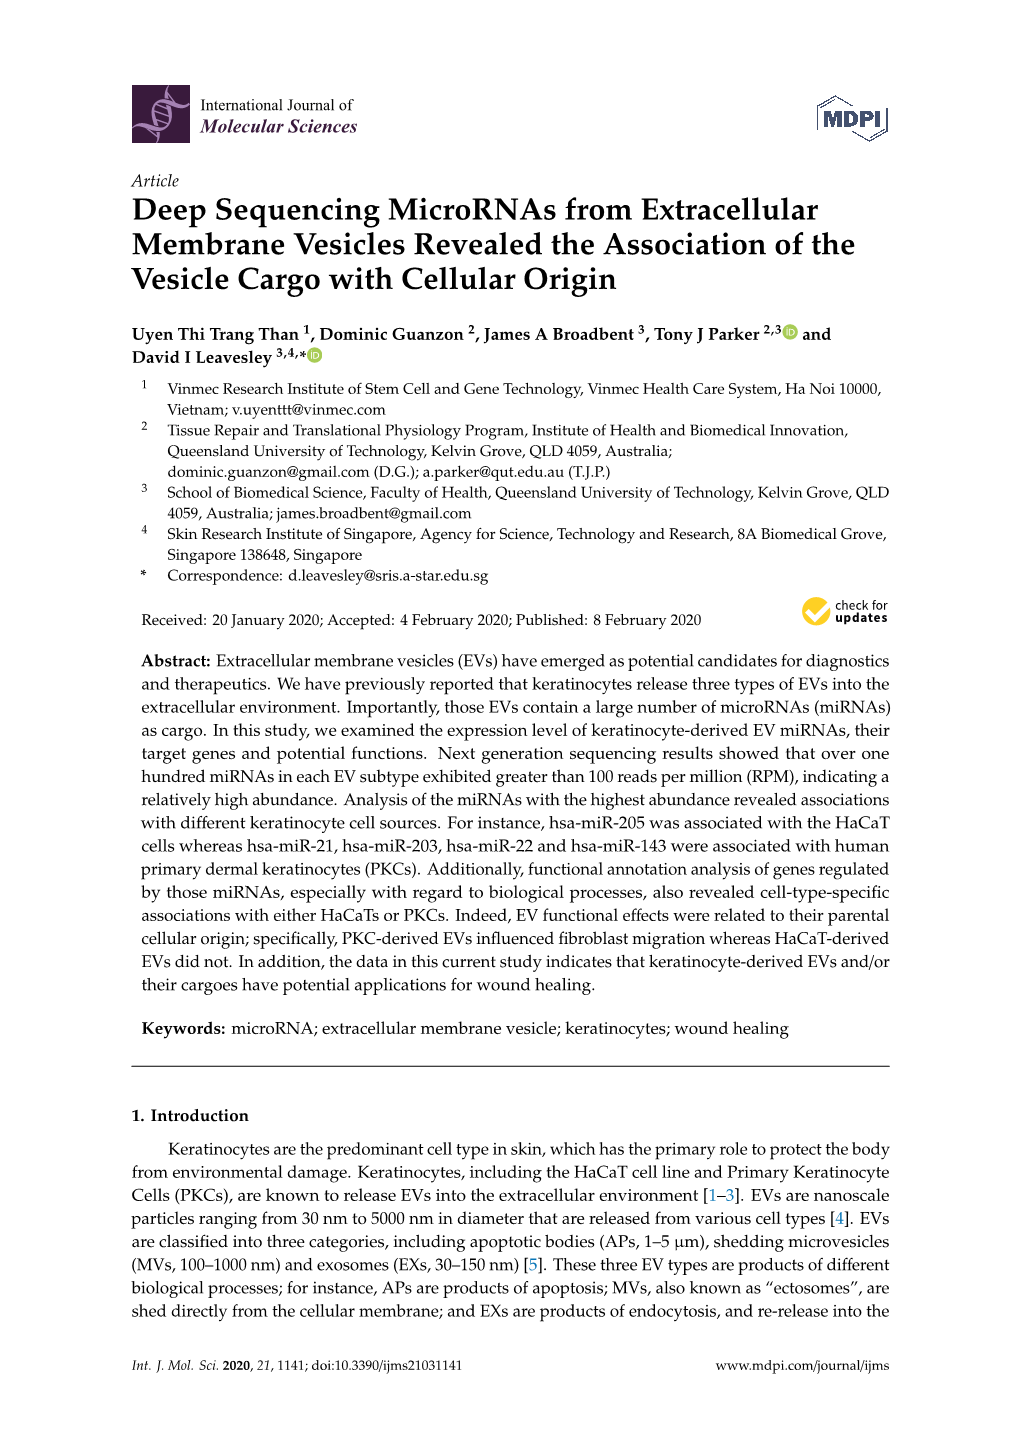 Deep Sequencing Micrornas from Extracellular Membrane Vesicles Revealed the Association of the Vesicle Cargo with Cellular Origin